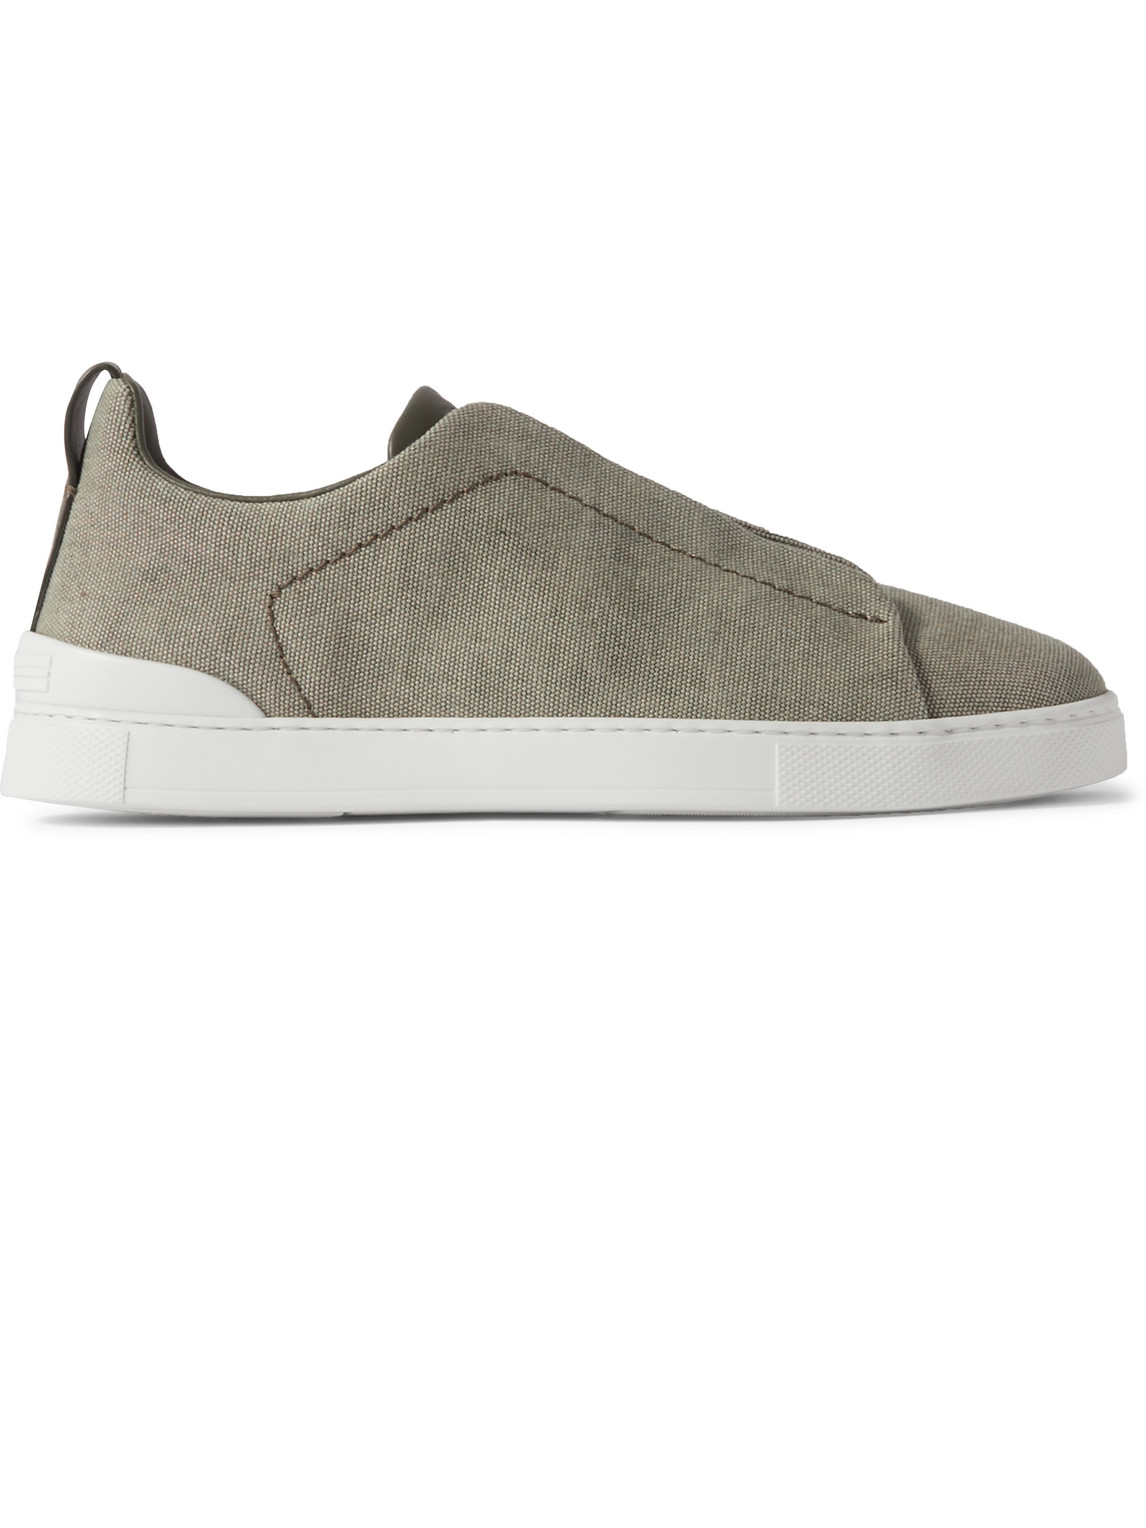 Zegna Triple Stitch Leather-trimmed Canvas Sneakers In Green